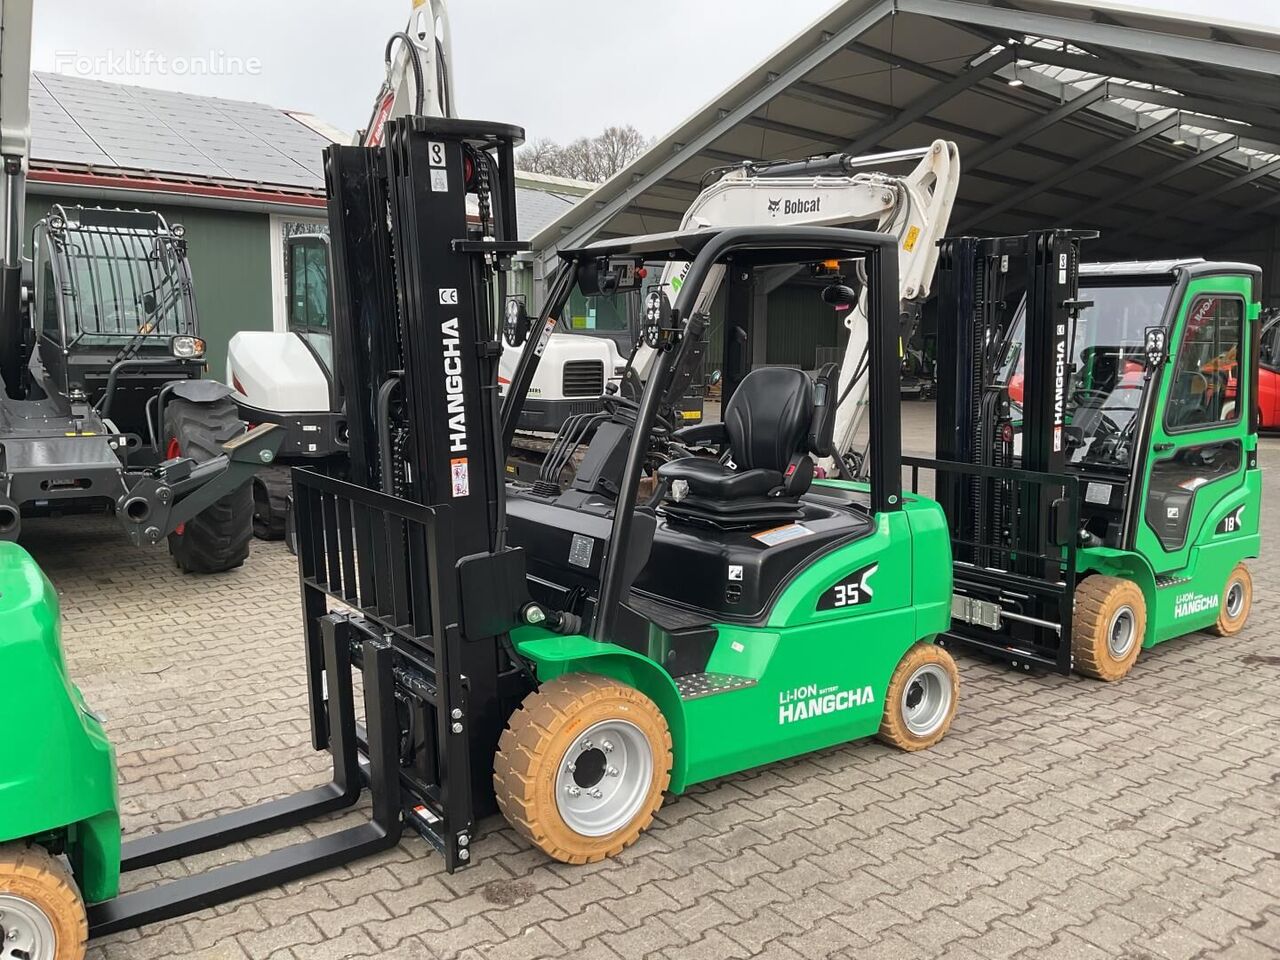 Hangcha CPD 35 -XD4-SI21 electric forklift